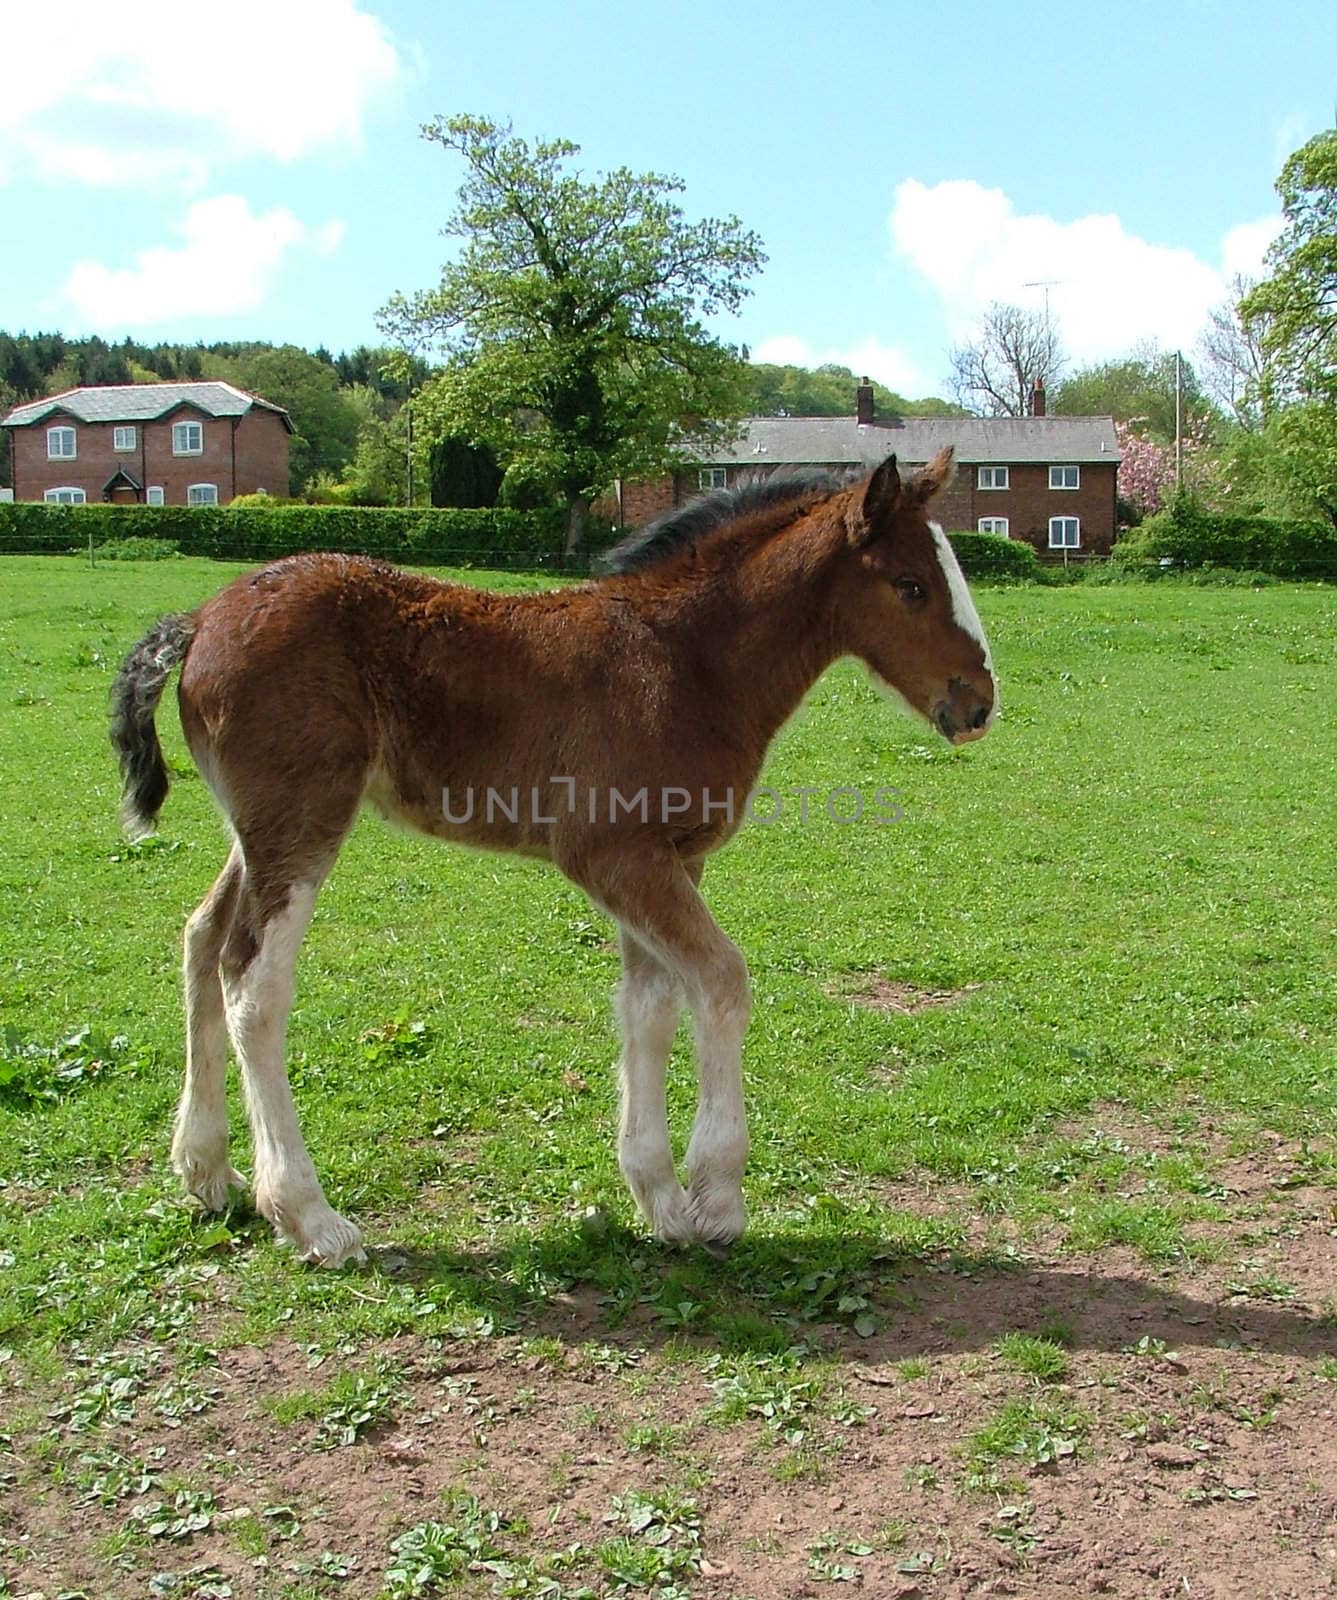 A young Shire horse foal